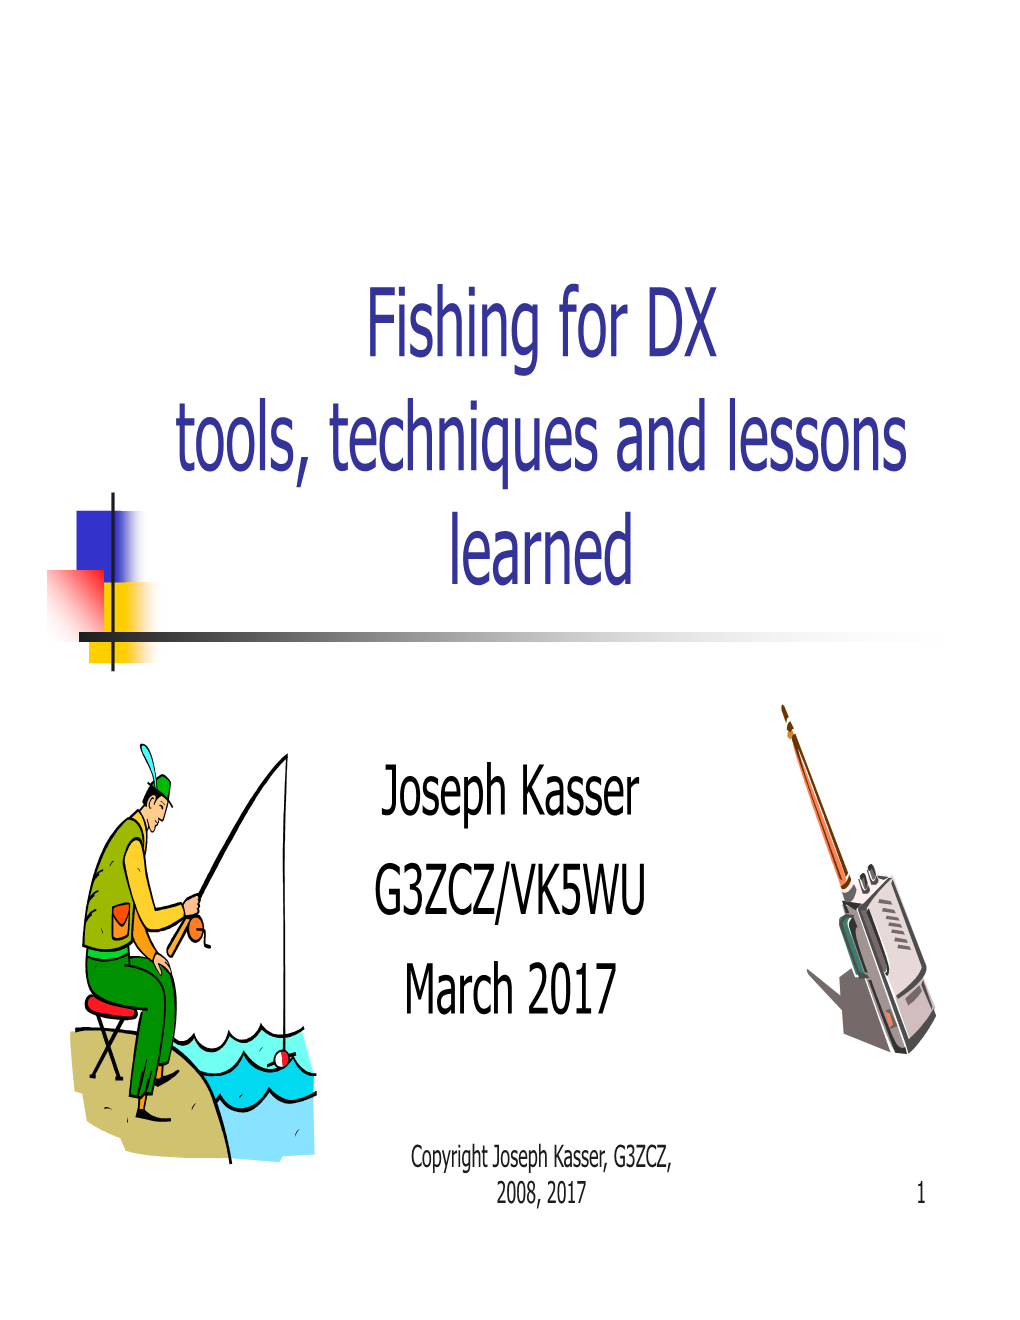 Fishing for DX Tools, Techniques and Lessons Learned